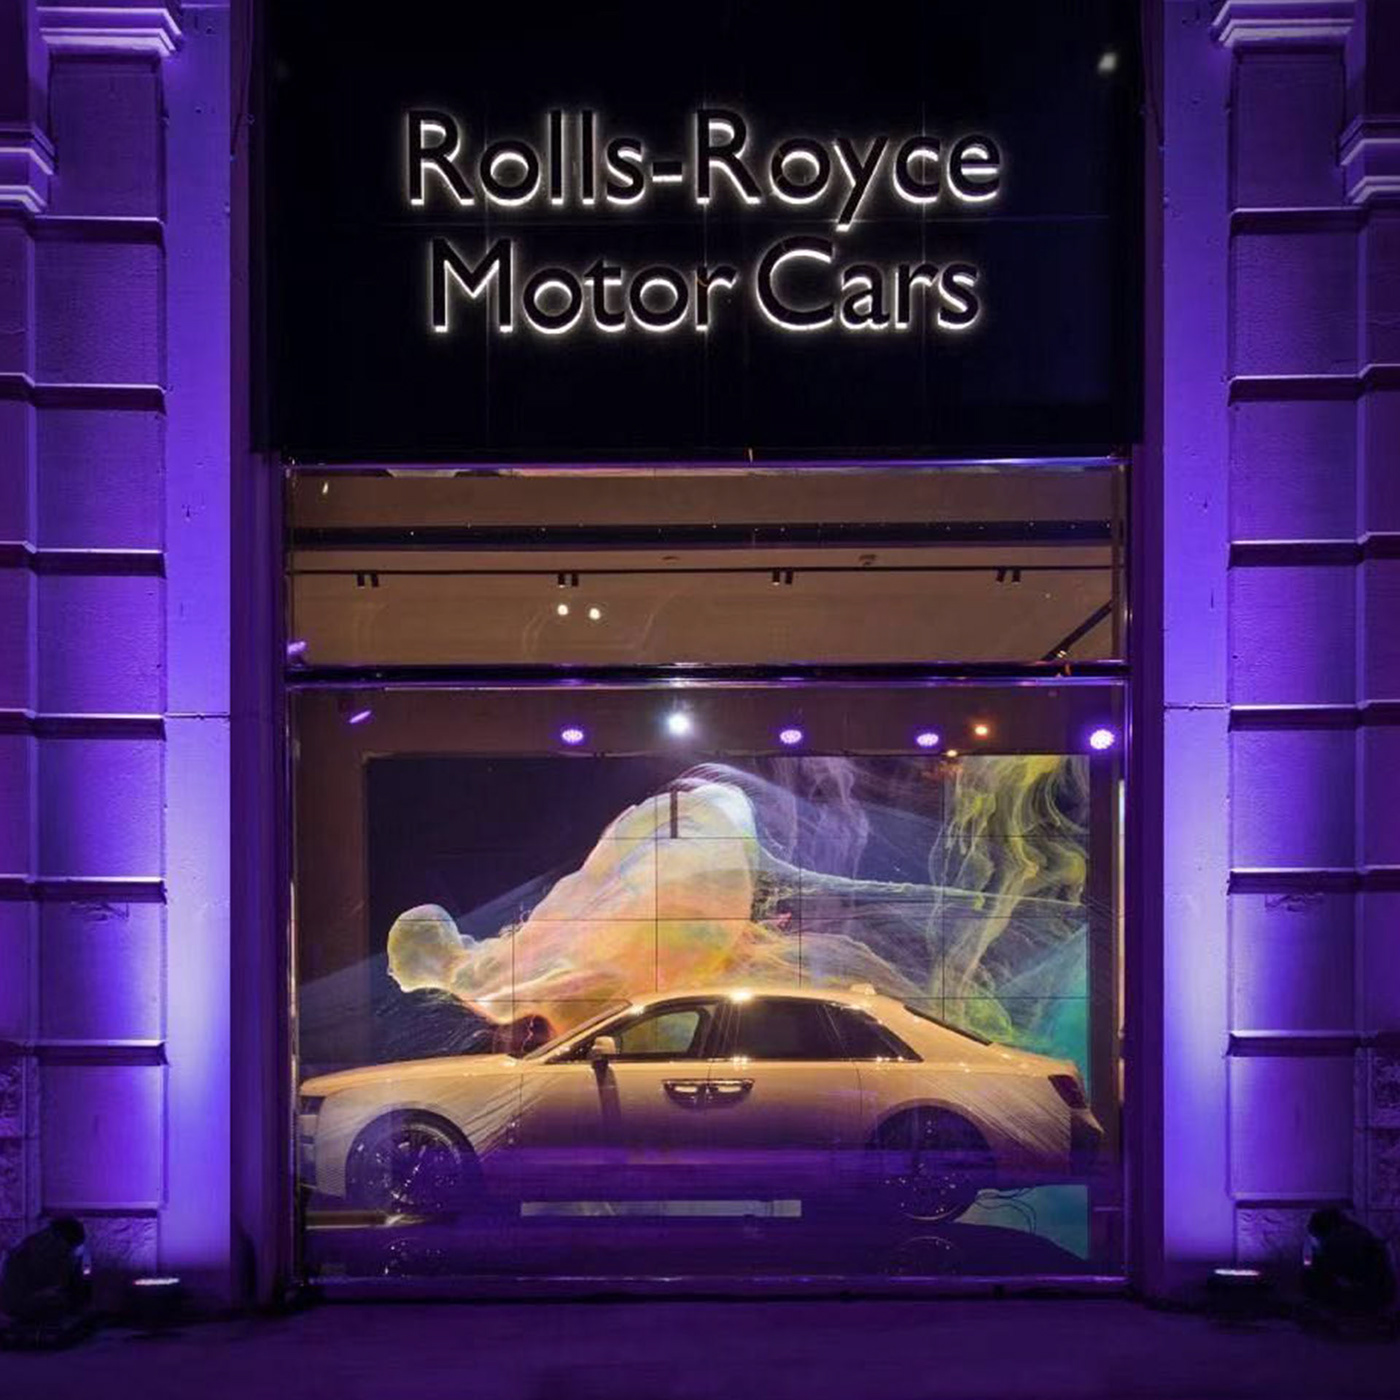 rollsroyce 3danimation 3dmapping houdini showroom Livevisuals videomapping projectionmapping storedesign visualinstallation